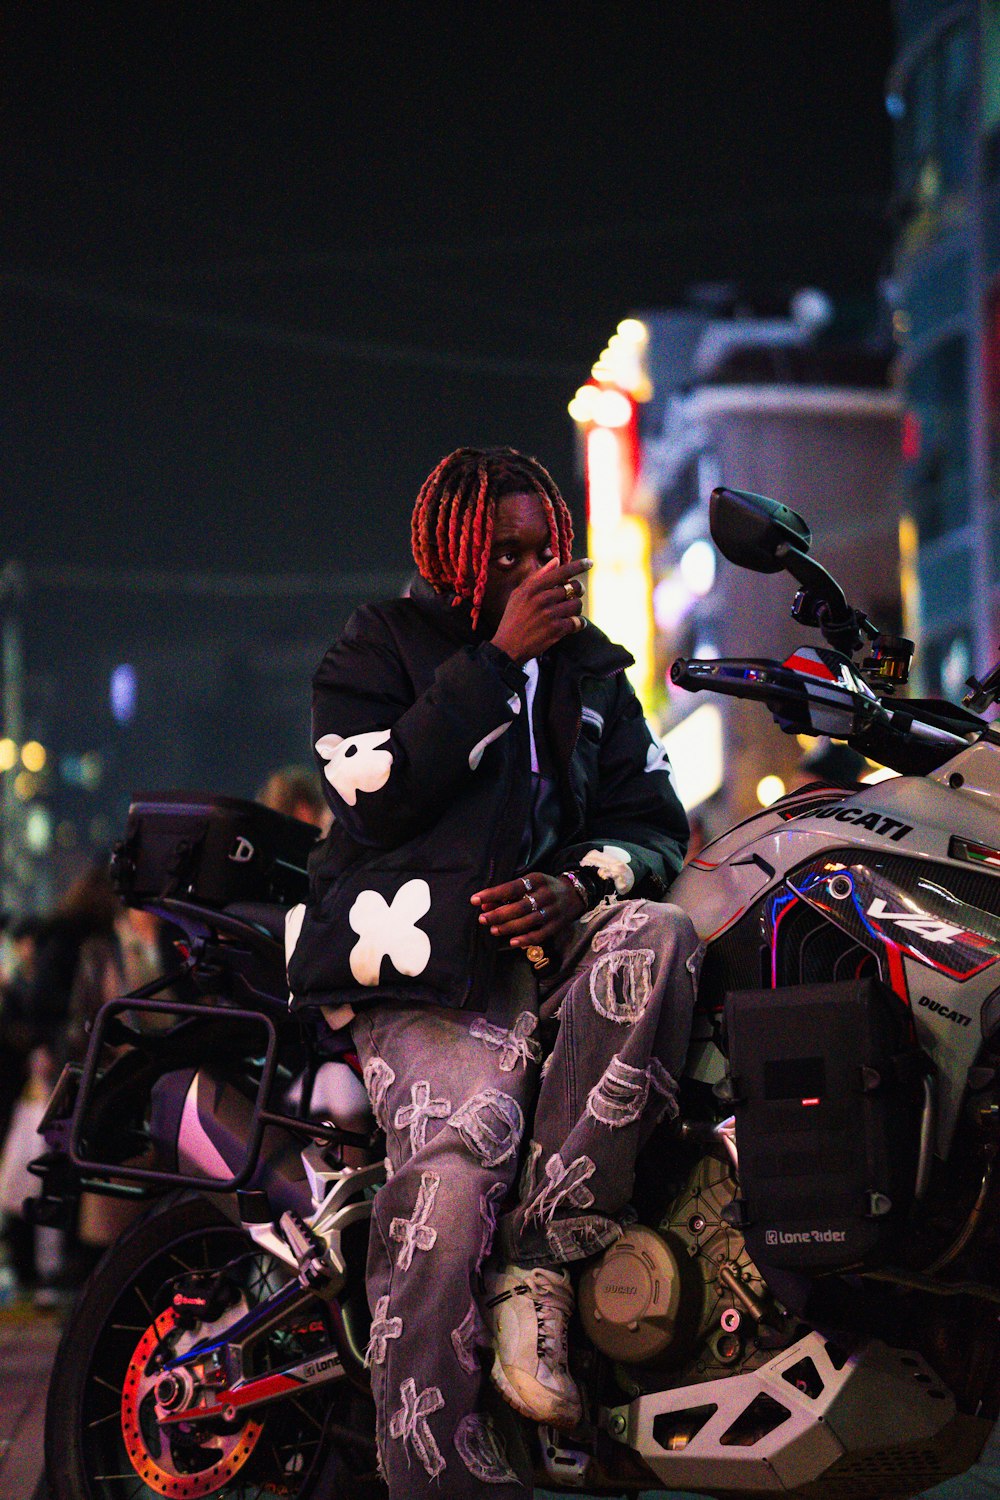 a man with dreadlocks sitting on a motorcycle